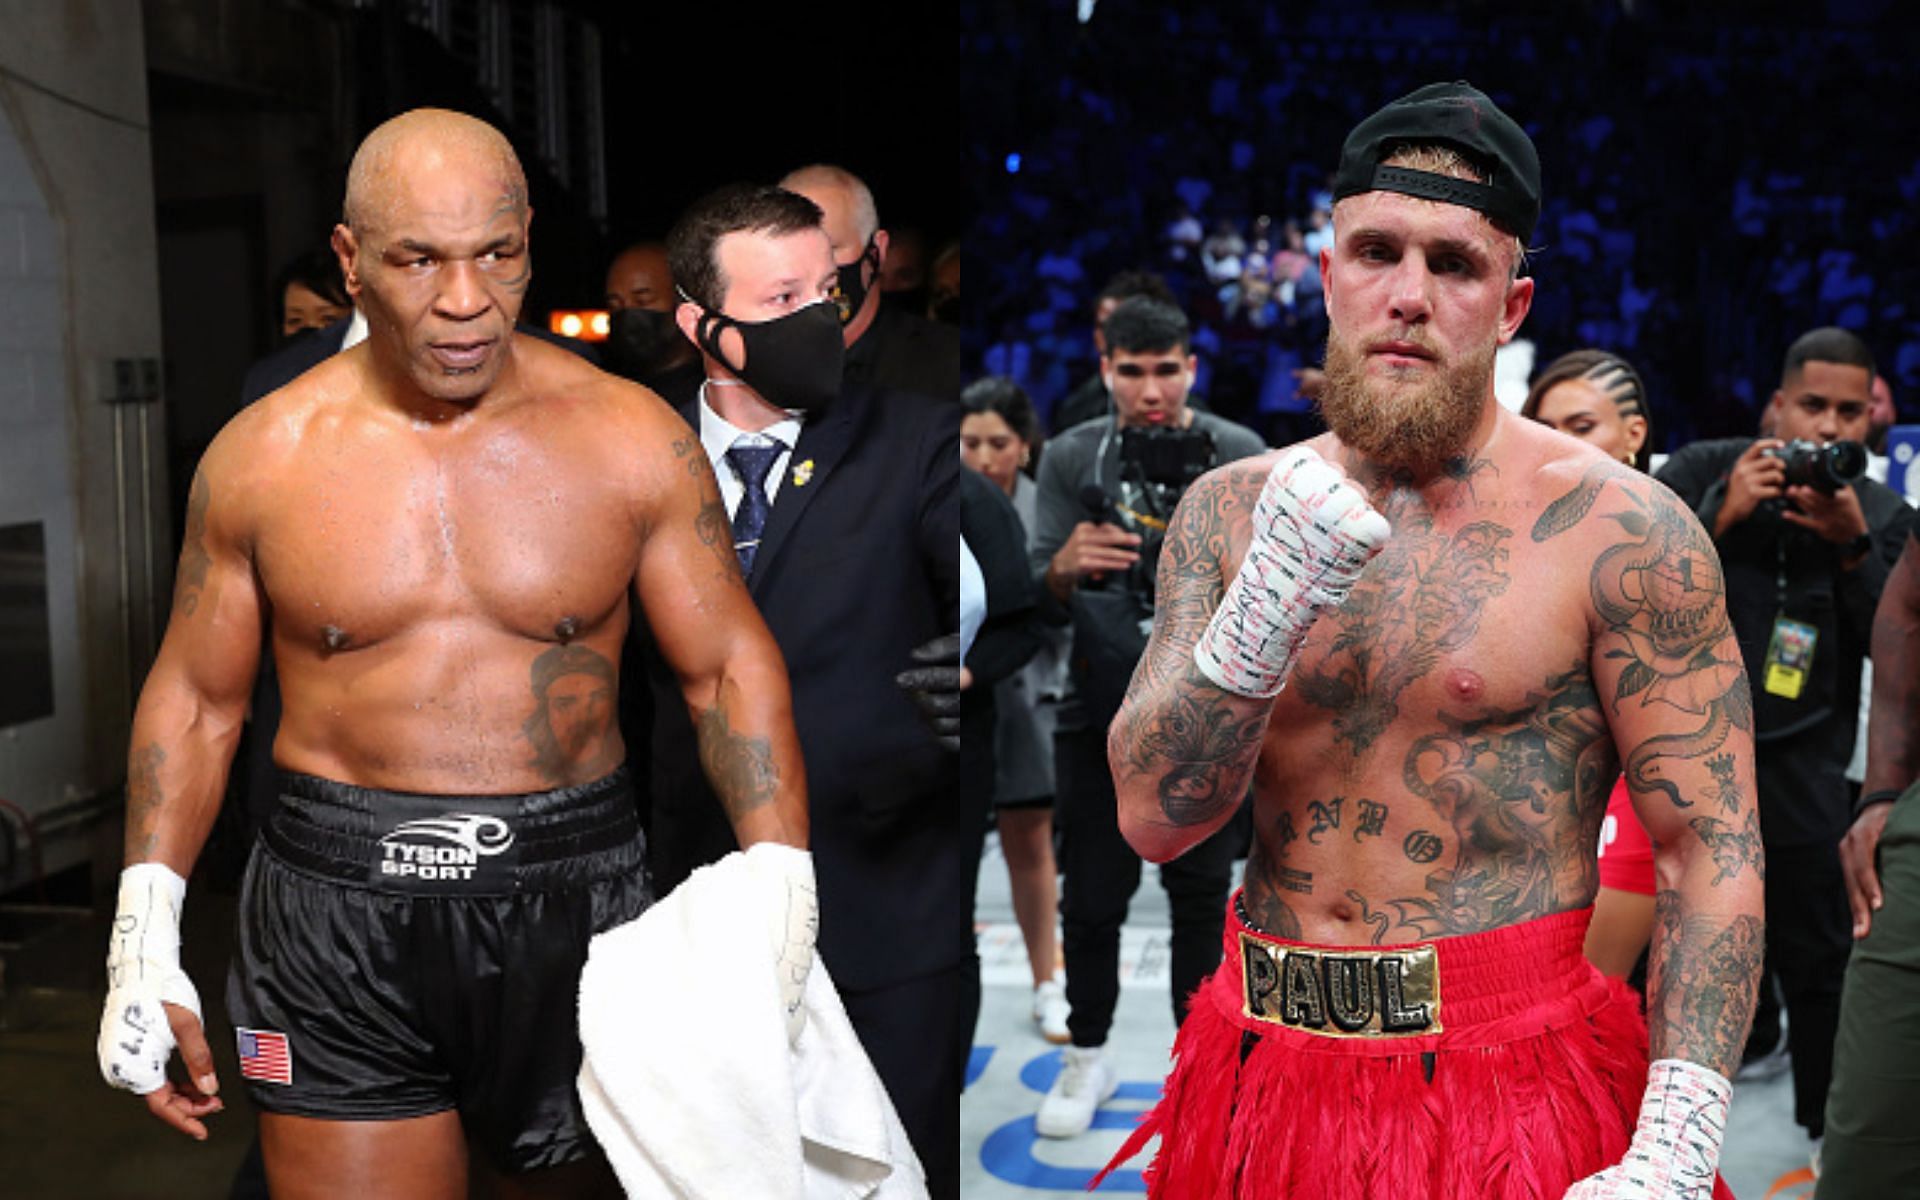 Mike Tyson vs. Jake Paul rules set [Image credits: Getty Images]